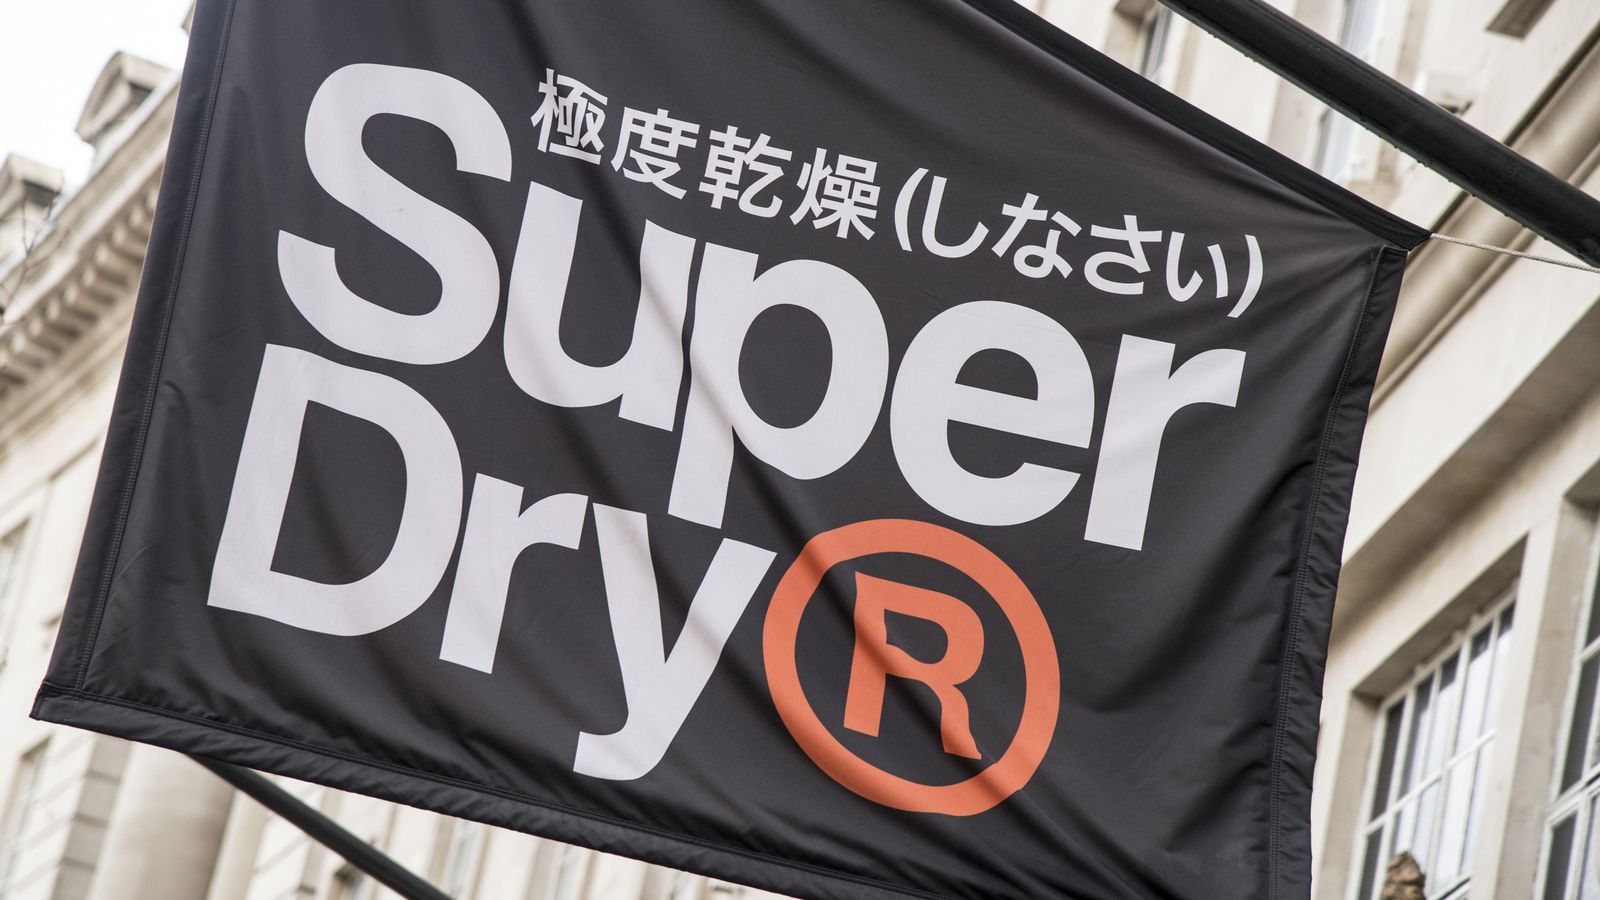 Superdry in talks with Indian giant Reliance to fashion £25m licensing deal